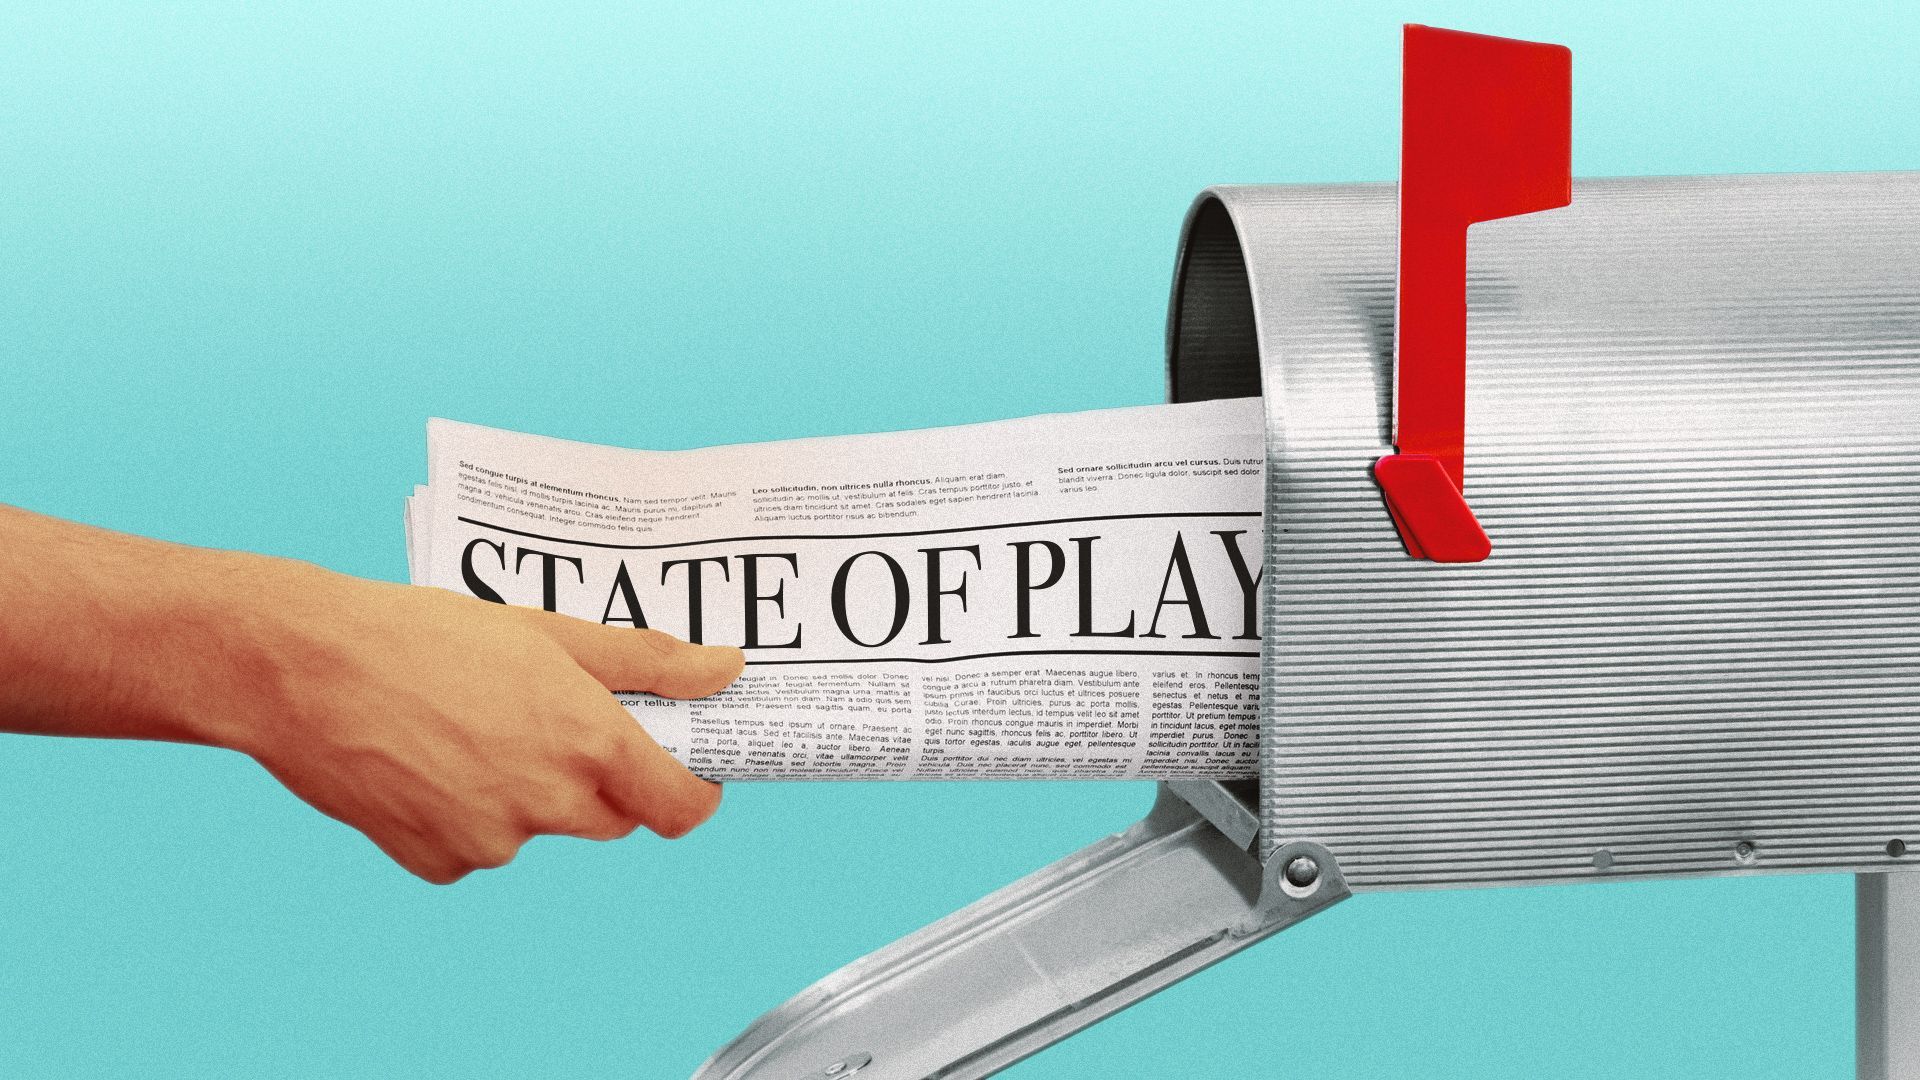 Illustration of a person retrieving a newspaper titled "State of Play" from a mailbox.